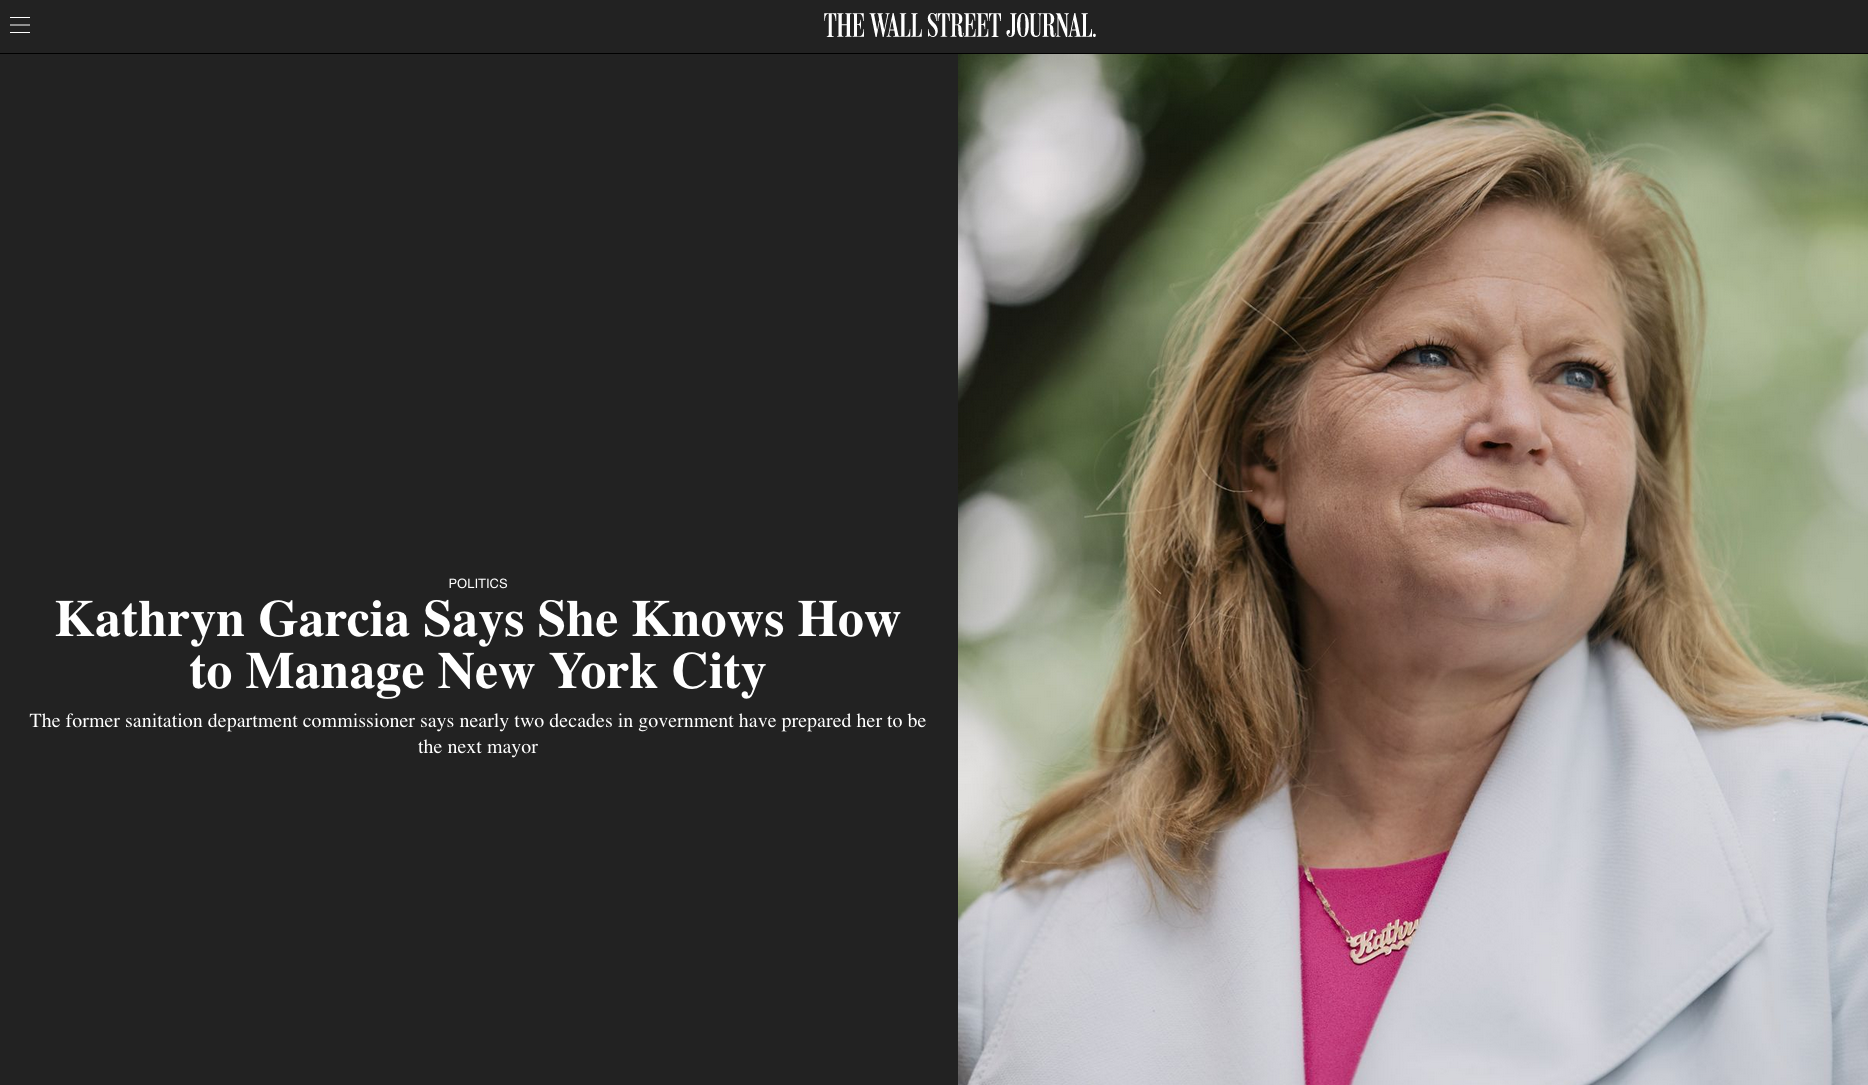 for The Wall Street Journal: Kathryn Garcia Says She Knows How to Manage New York City